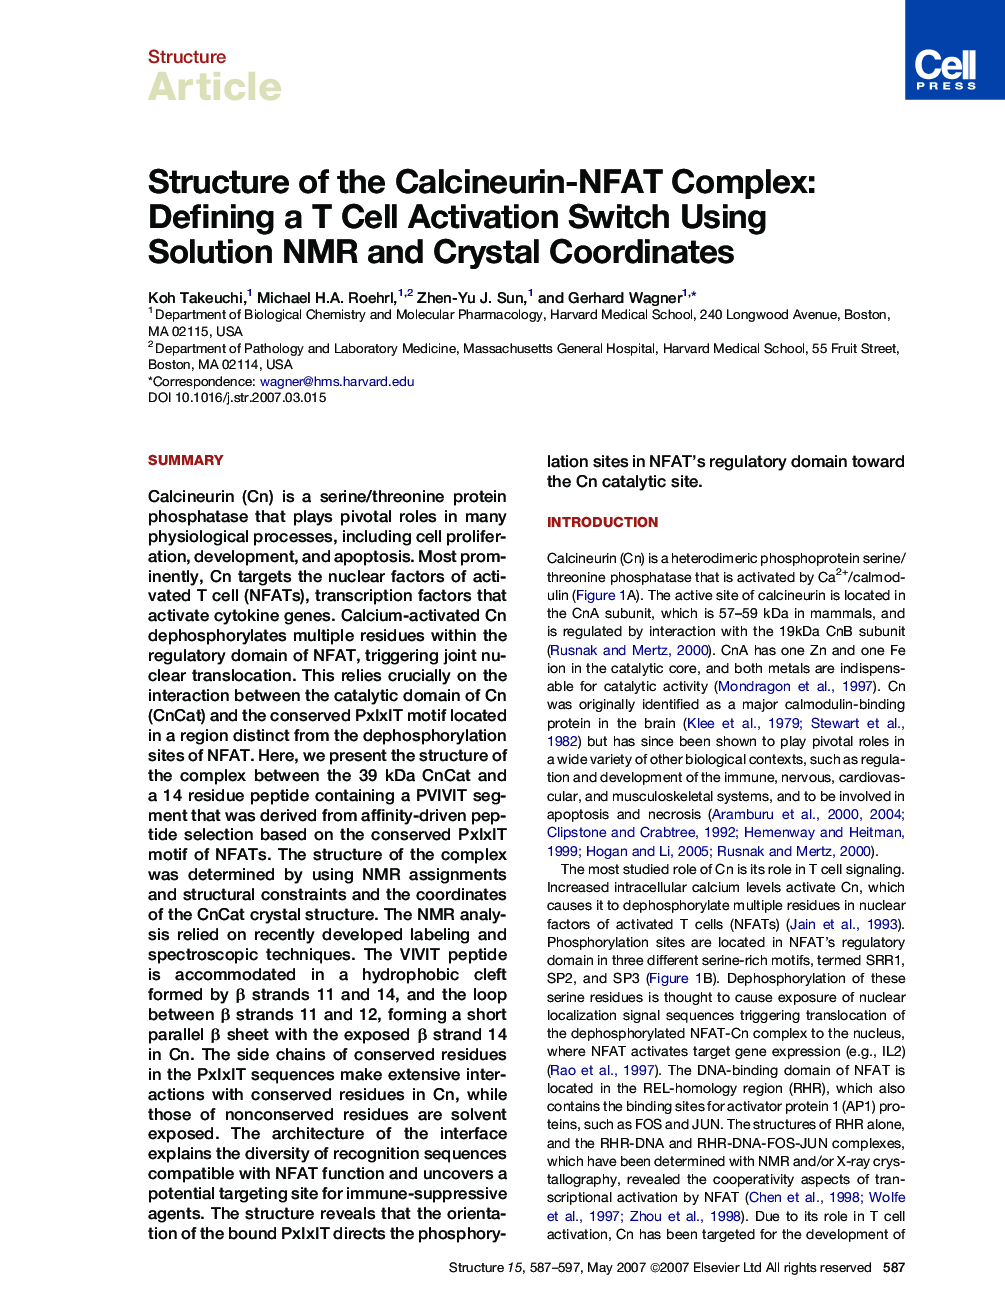 Structure of the Calcineurin-NFAT Complex: Defining a T Cell Activation Switch Using Solution NMR and Crystal Coordinates